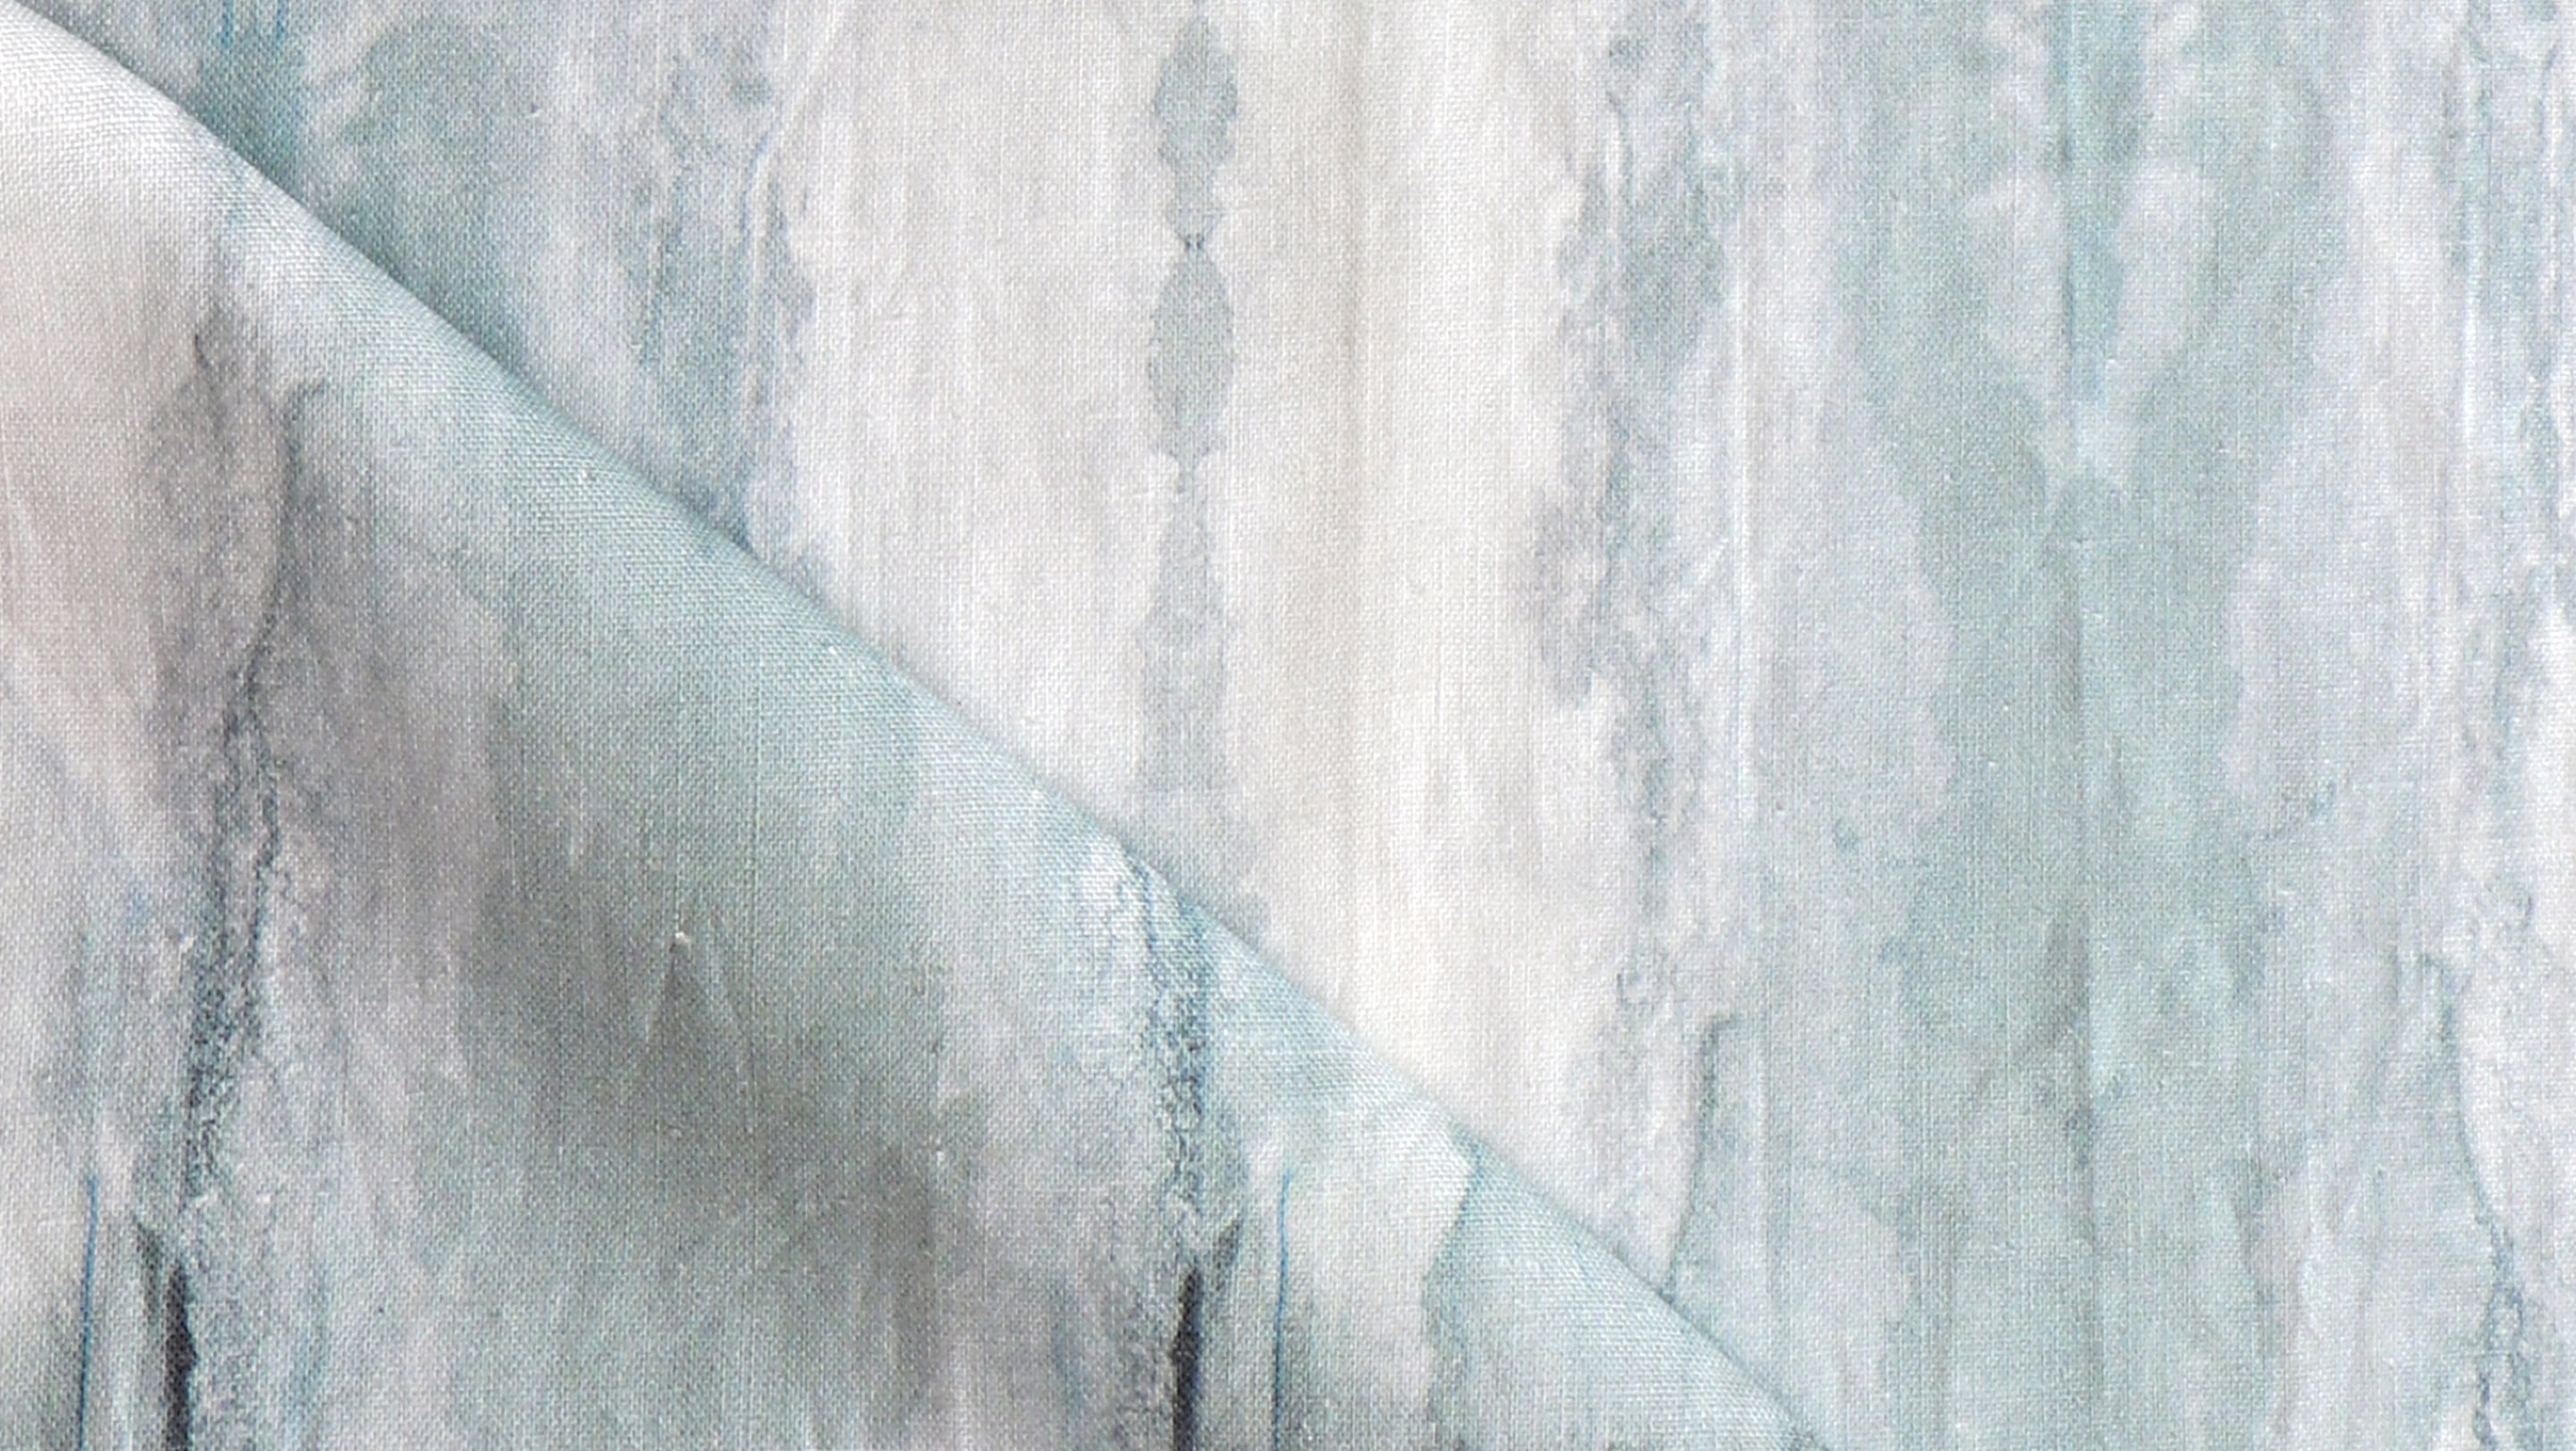 A close up of a blue and white marbled fabric